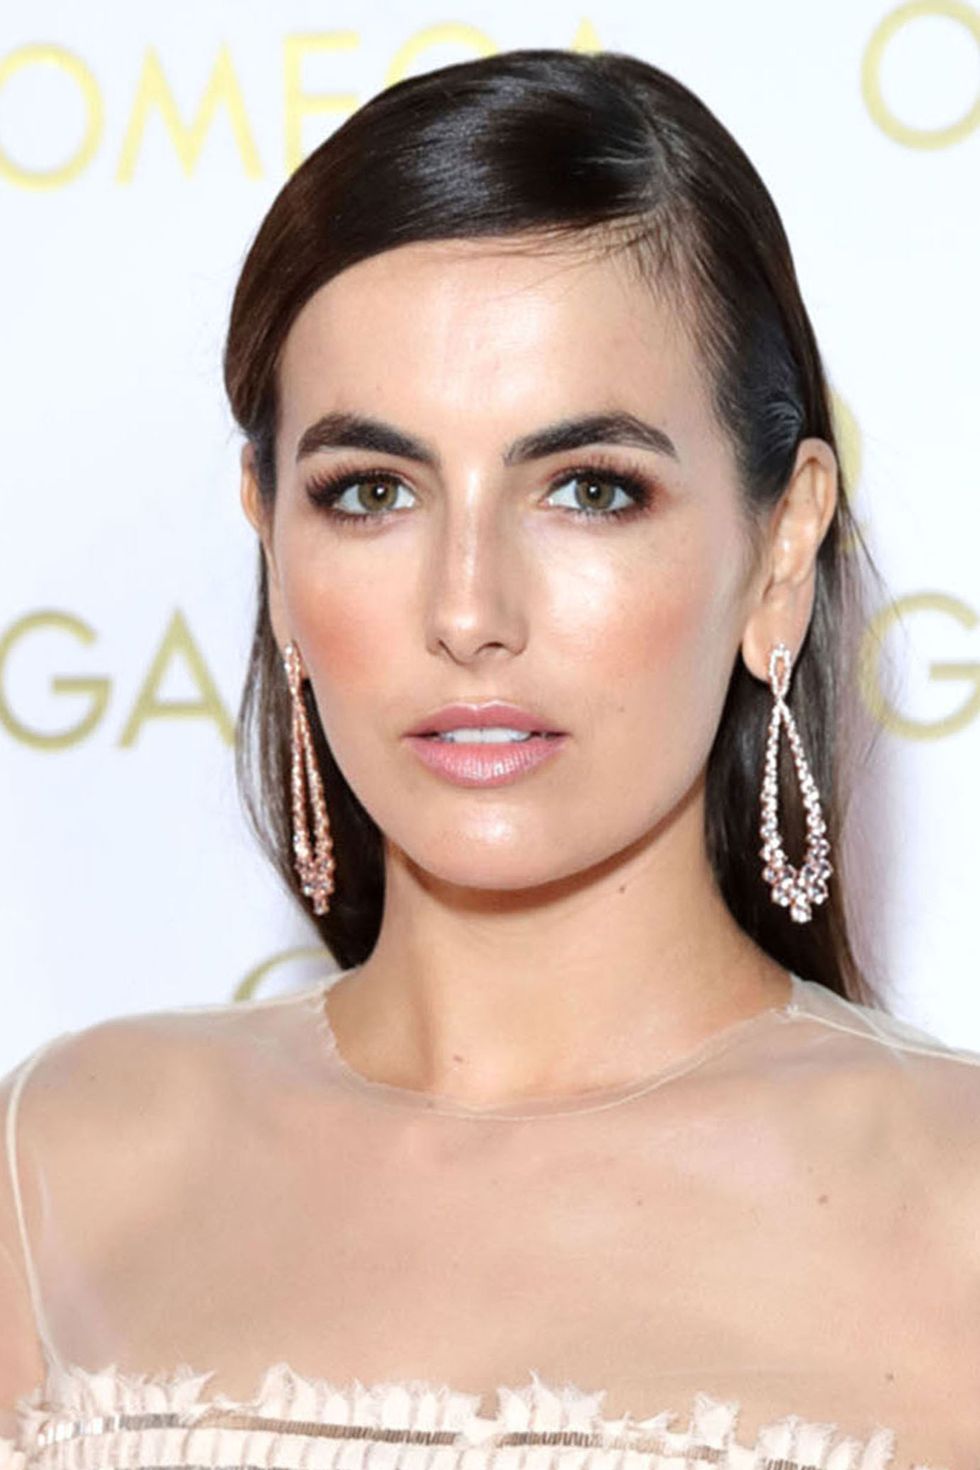 Camilla Belle sleeked back hair and pink lips and glowing skin